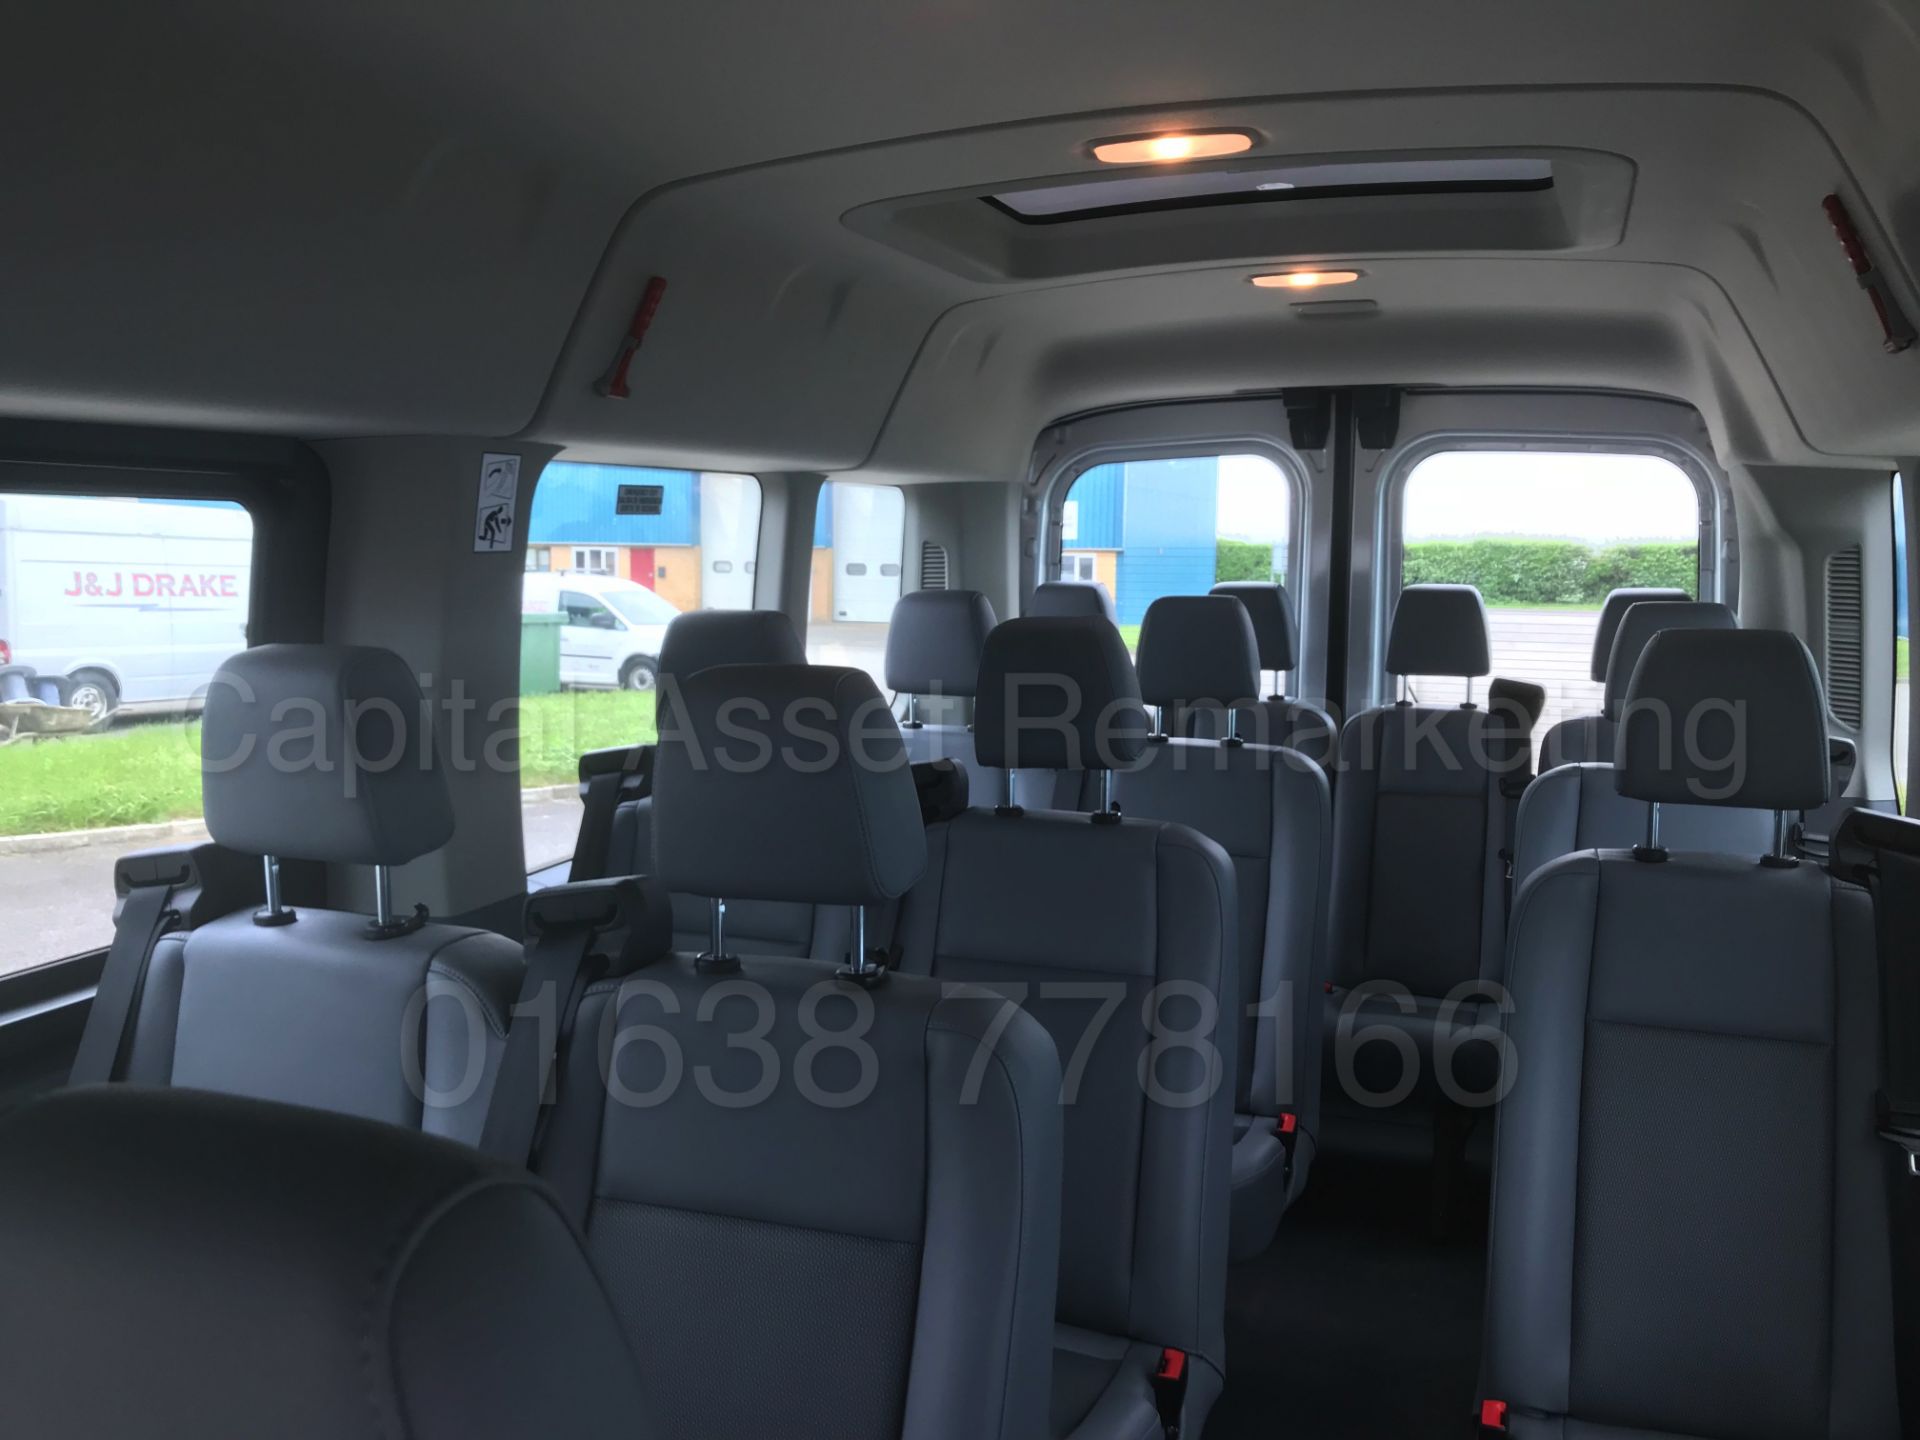 (On Sale) FORD TRANSIT LWB '15 SEATER MINI-BUS' (2018) '2.2 TDCI -125 BHP- 6 SPEED' 130 MILES ONLY ! - Image 27 of 50